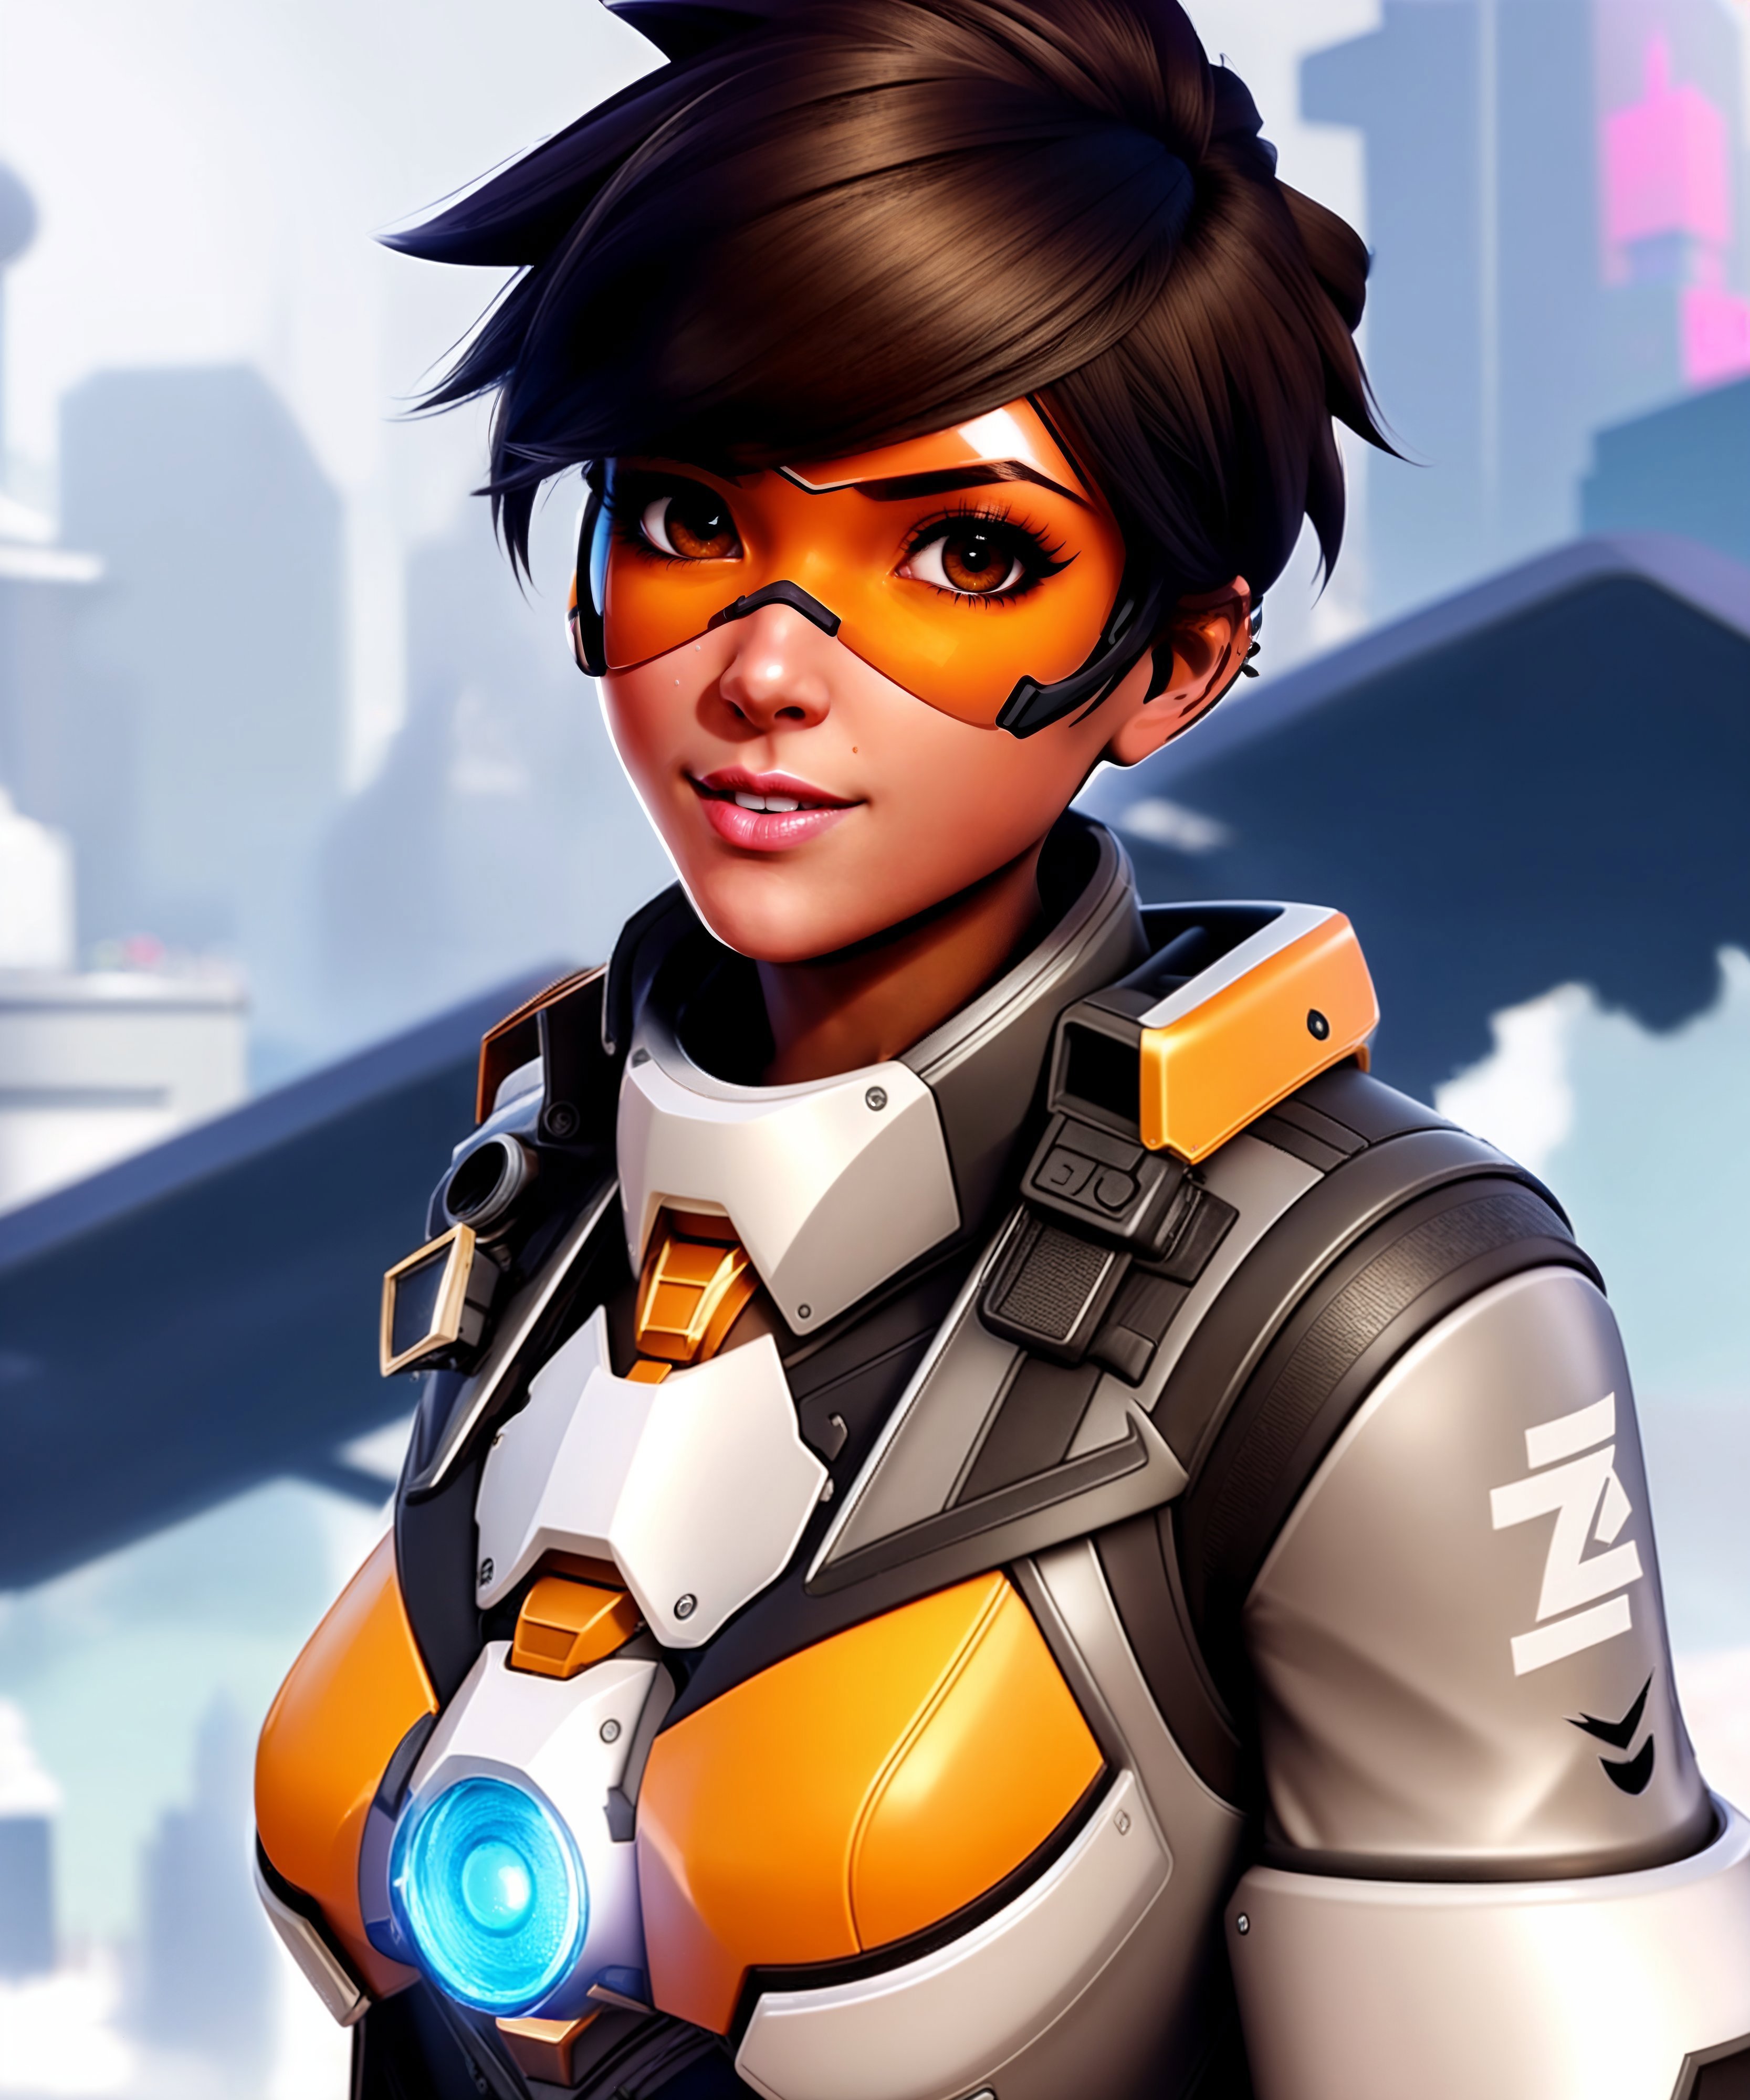 Tracer - Overwatch. image by Digital_Art_AI